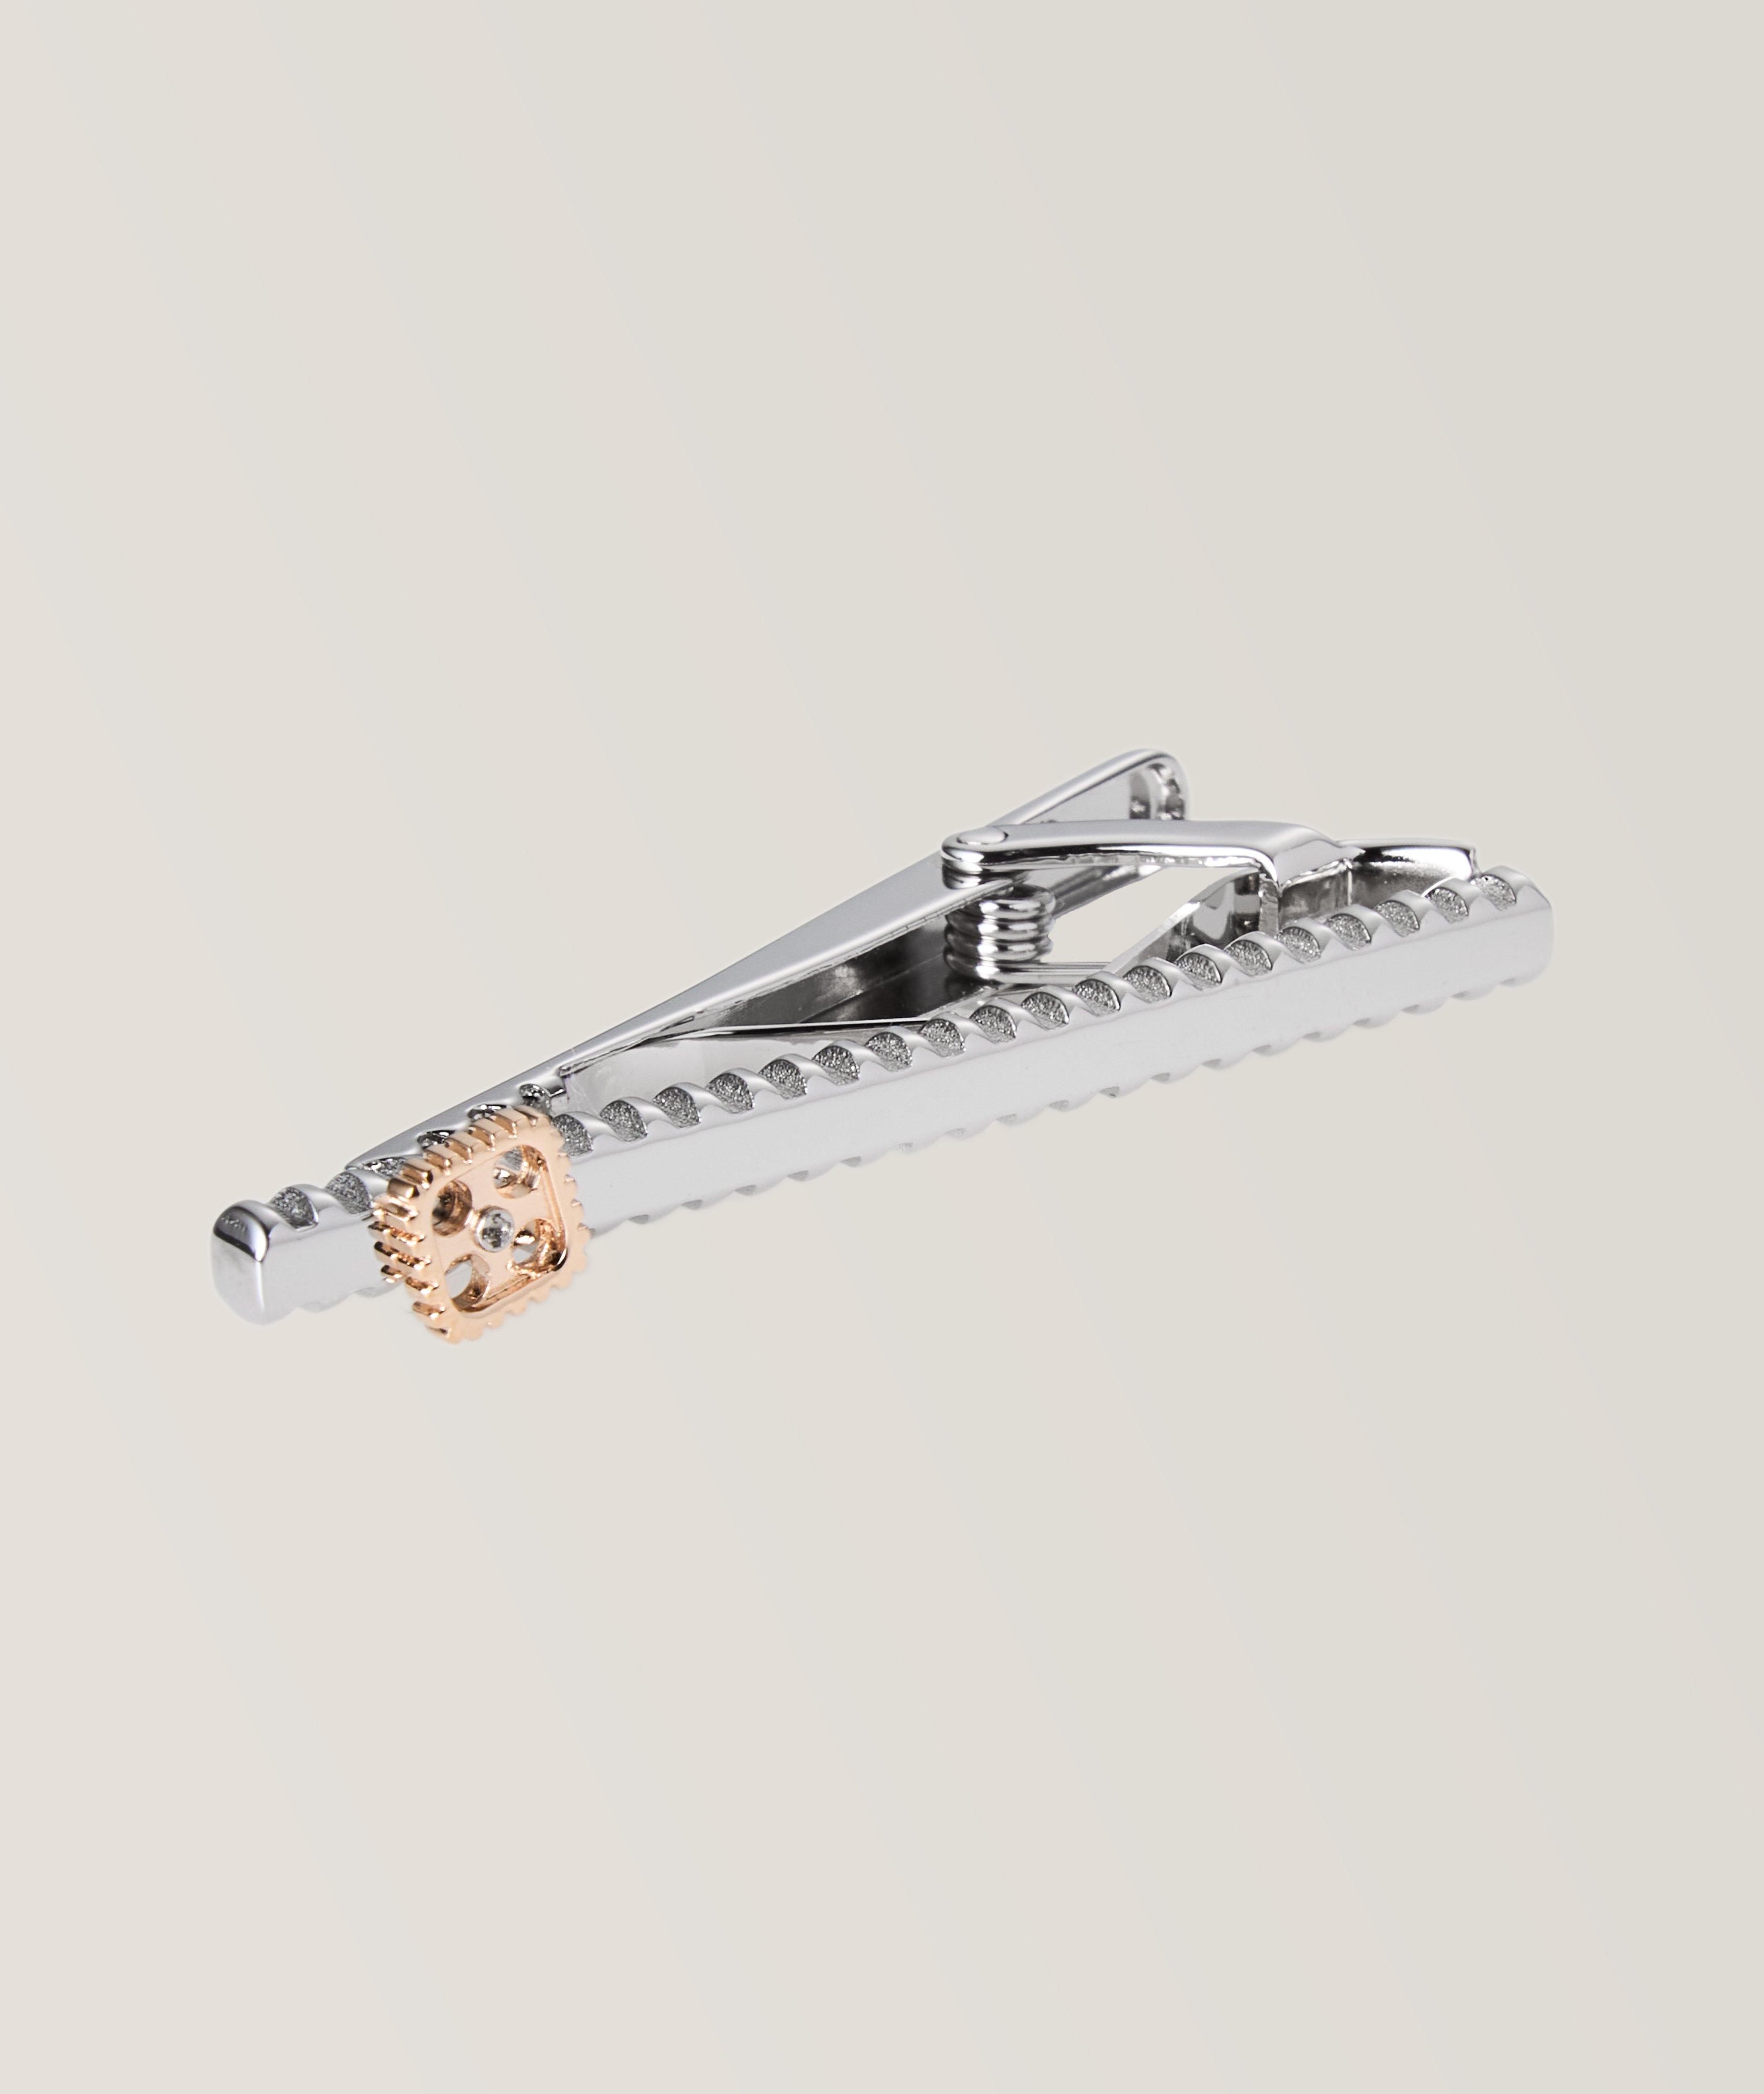 Elements Collection Gear Tie Clip image 0